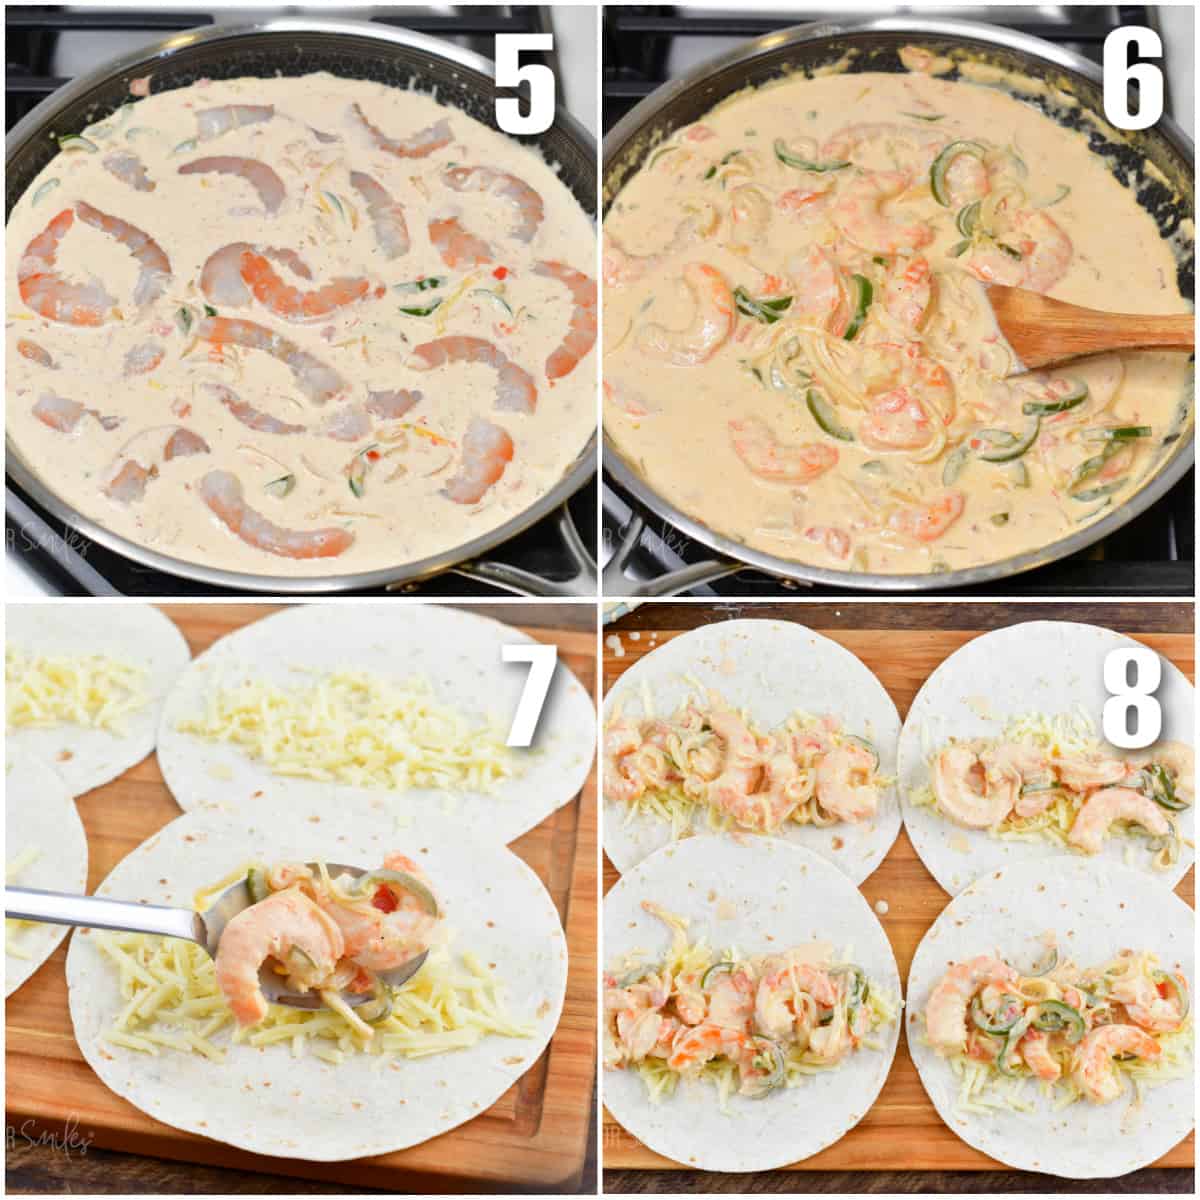 four images in a collage to cook shrimp in cream sauce and then stuff the tortillas for enchiladas.